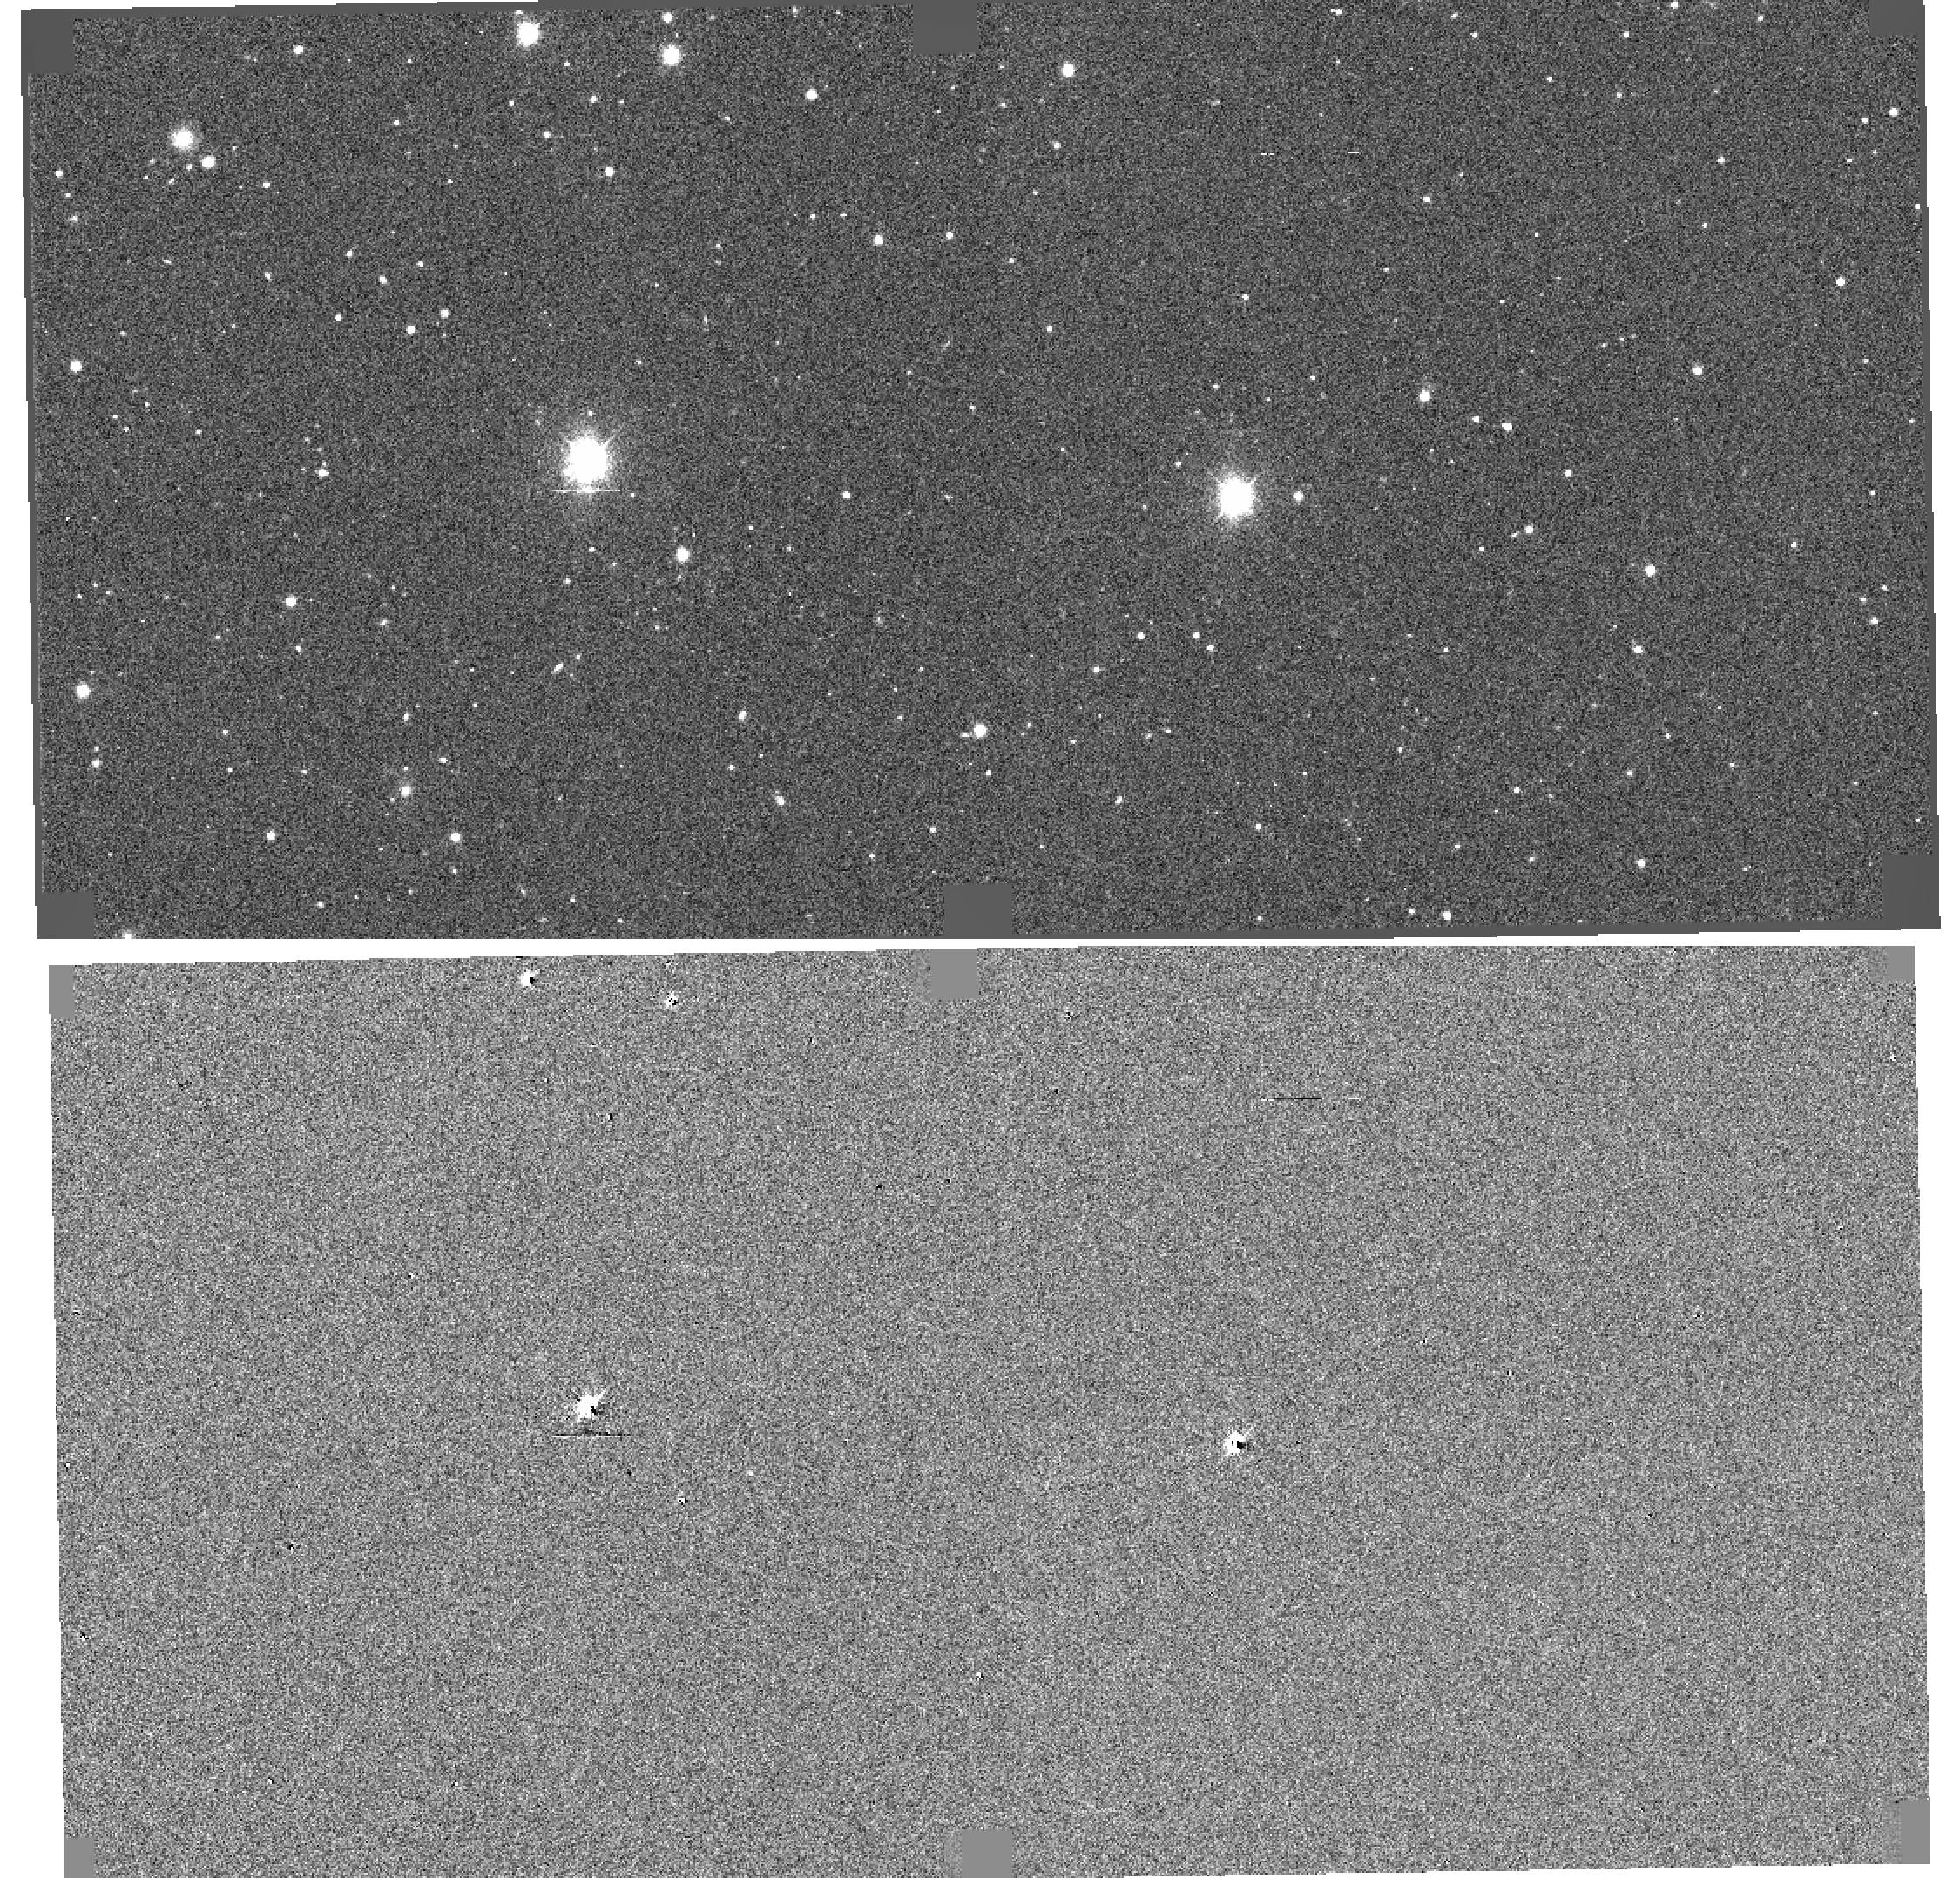 Calibrated exposure and difference image for DECam visit 410985, CCD 25